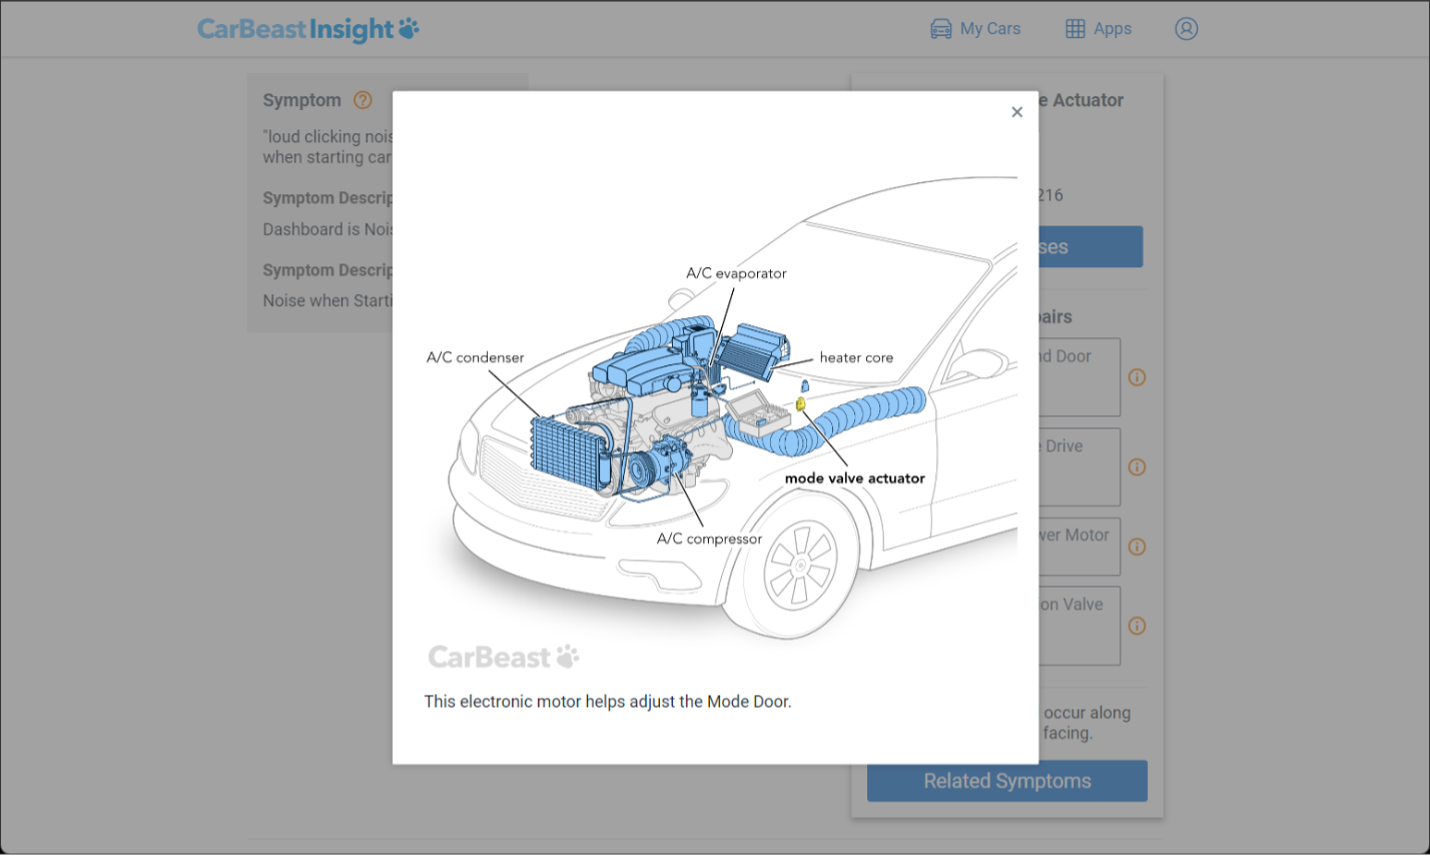 Illustration on CarBeast shows location of A/C Mode Valve Actuator